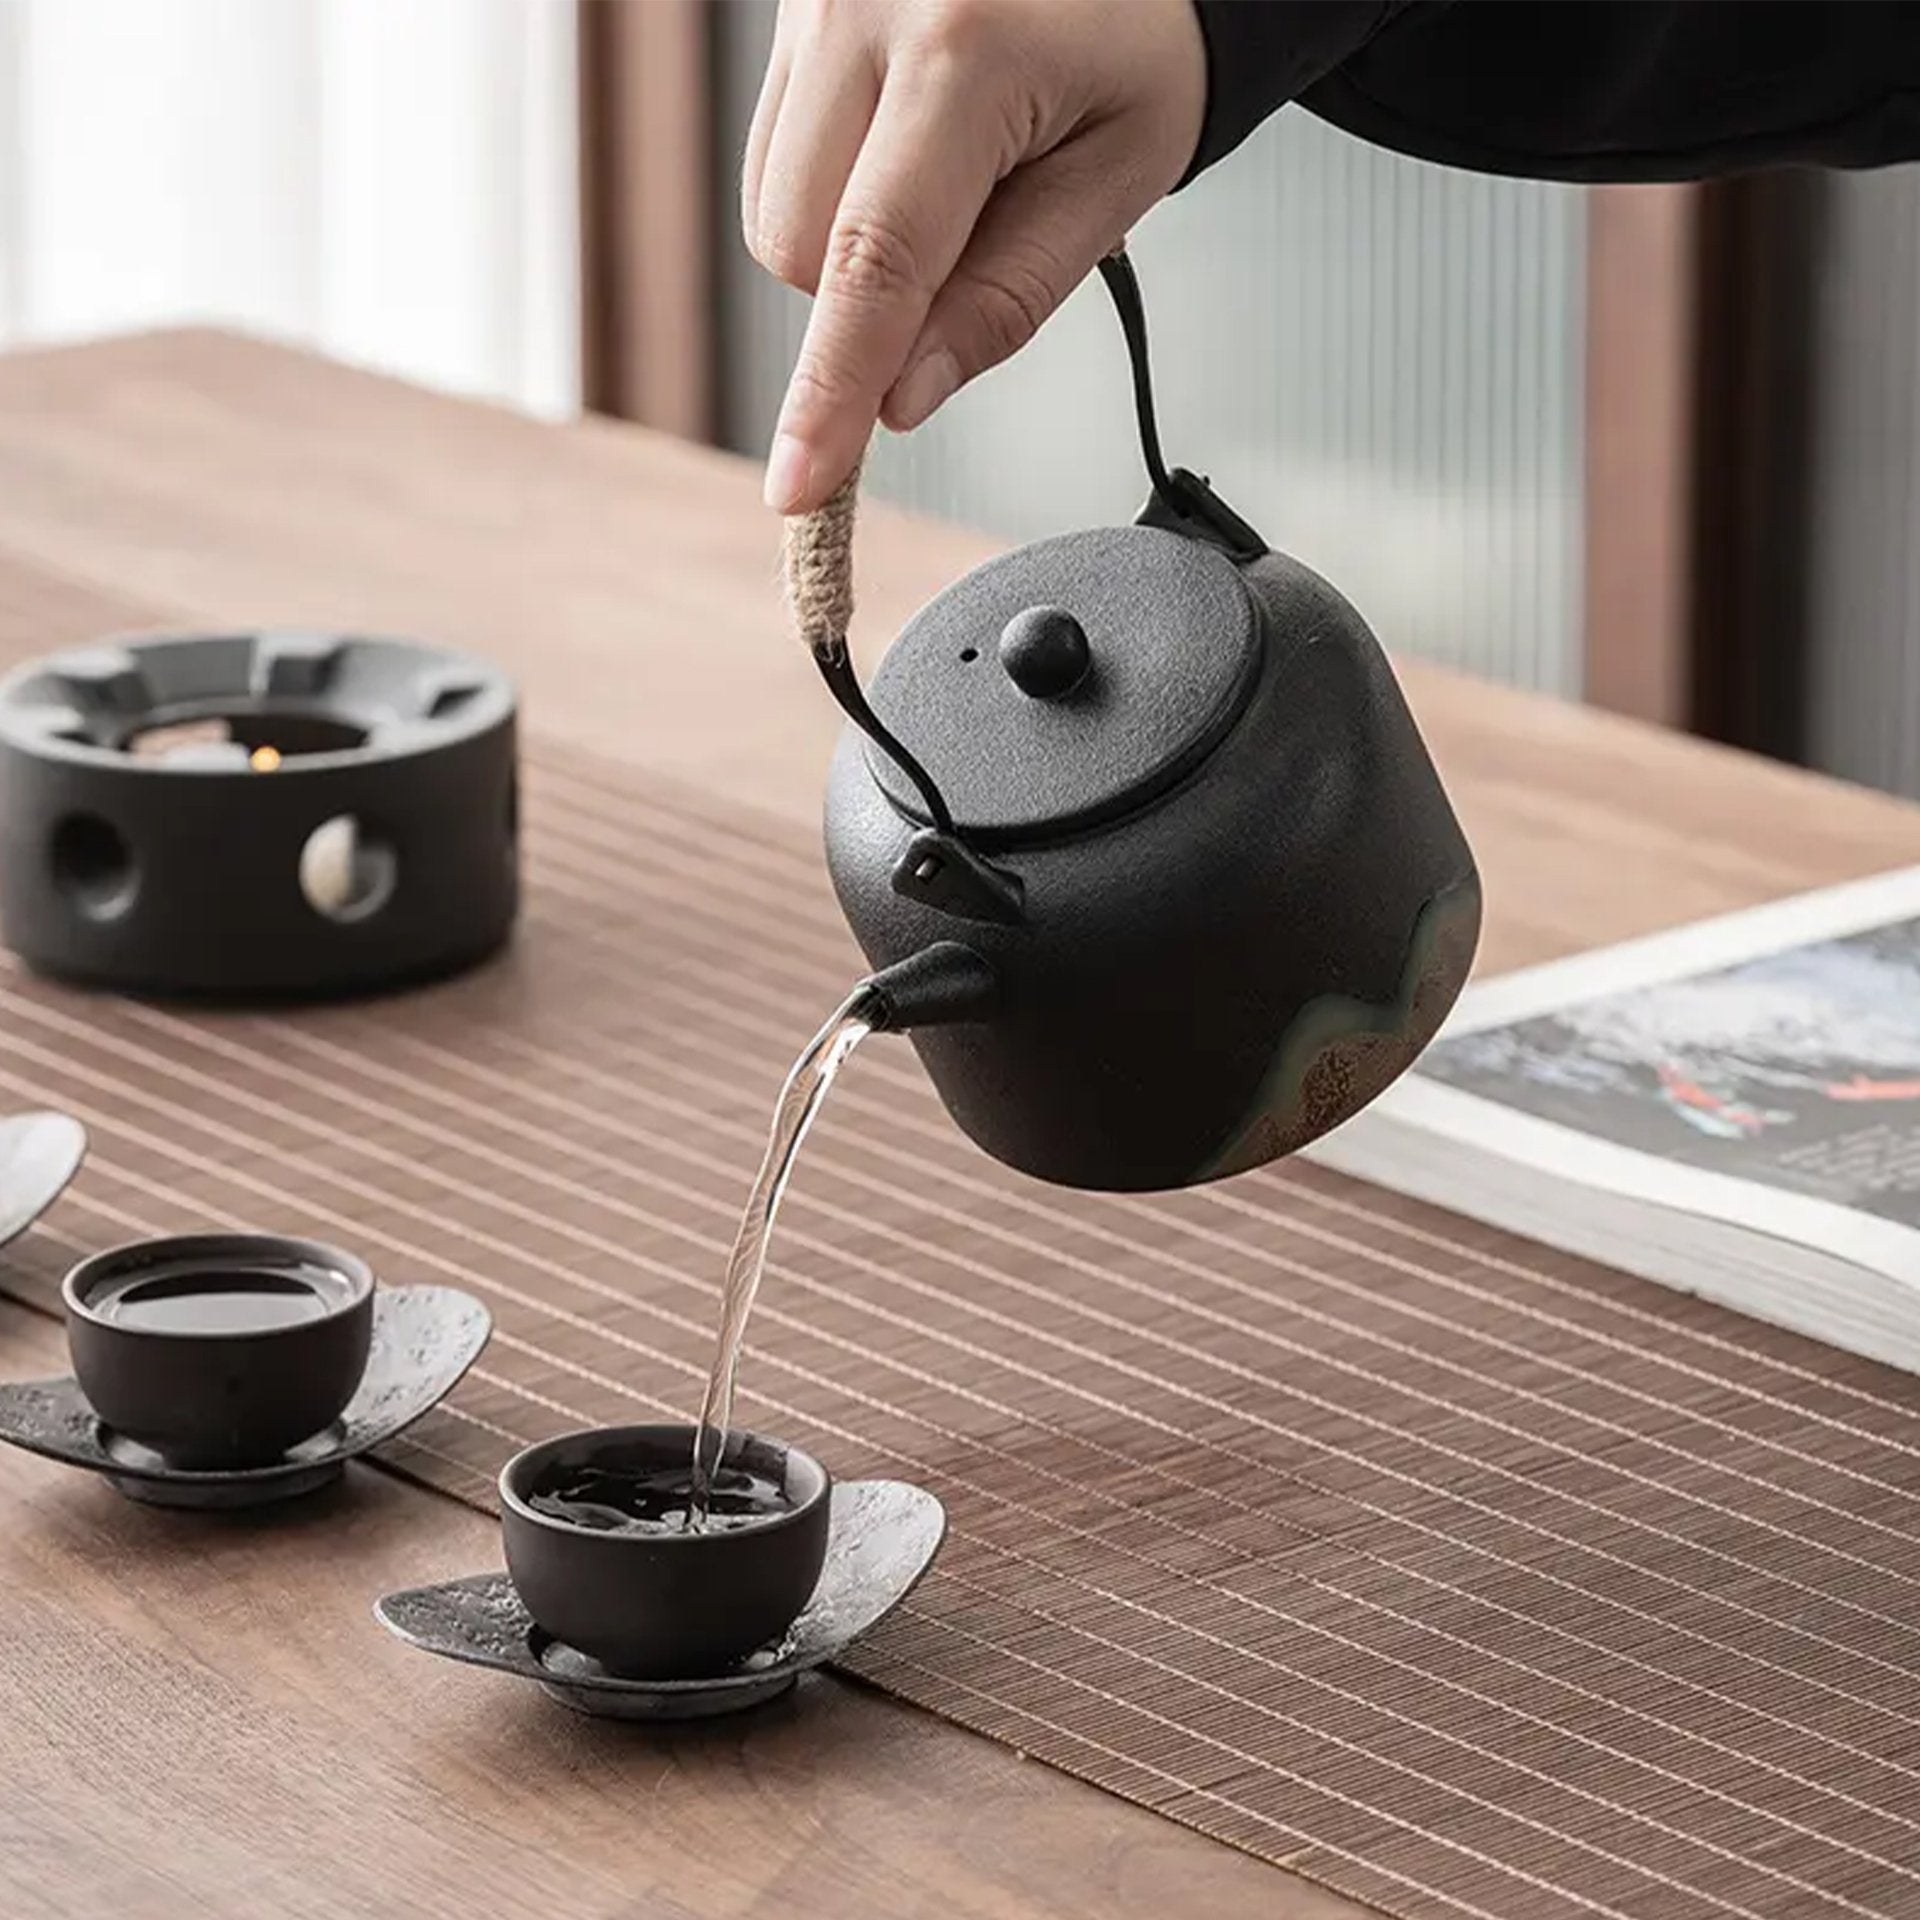 Japanese Style Ceramic Teapot with Stove - 350ml